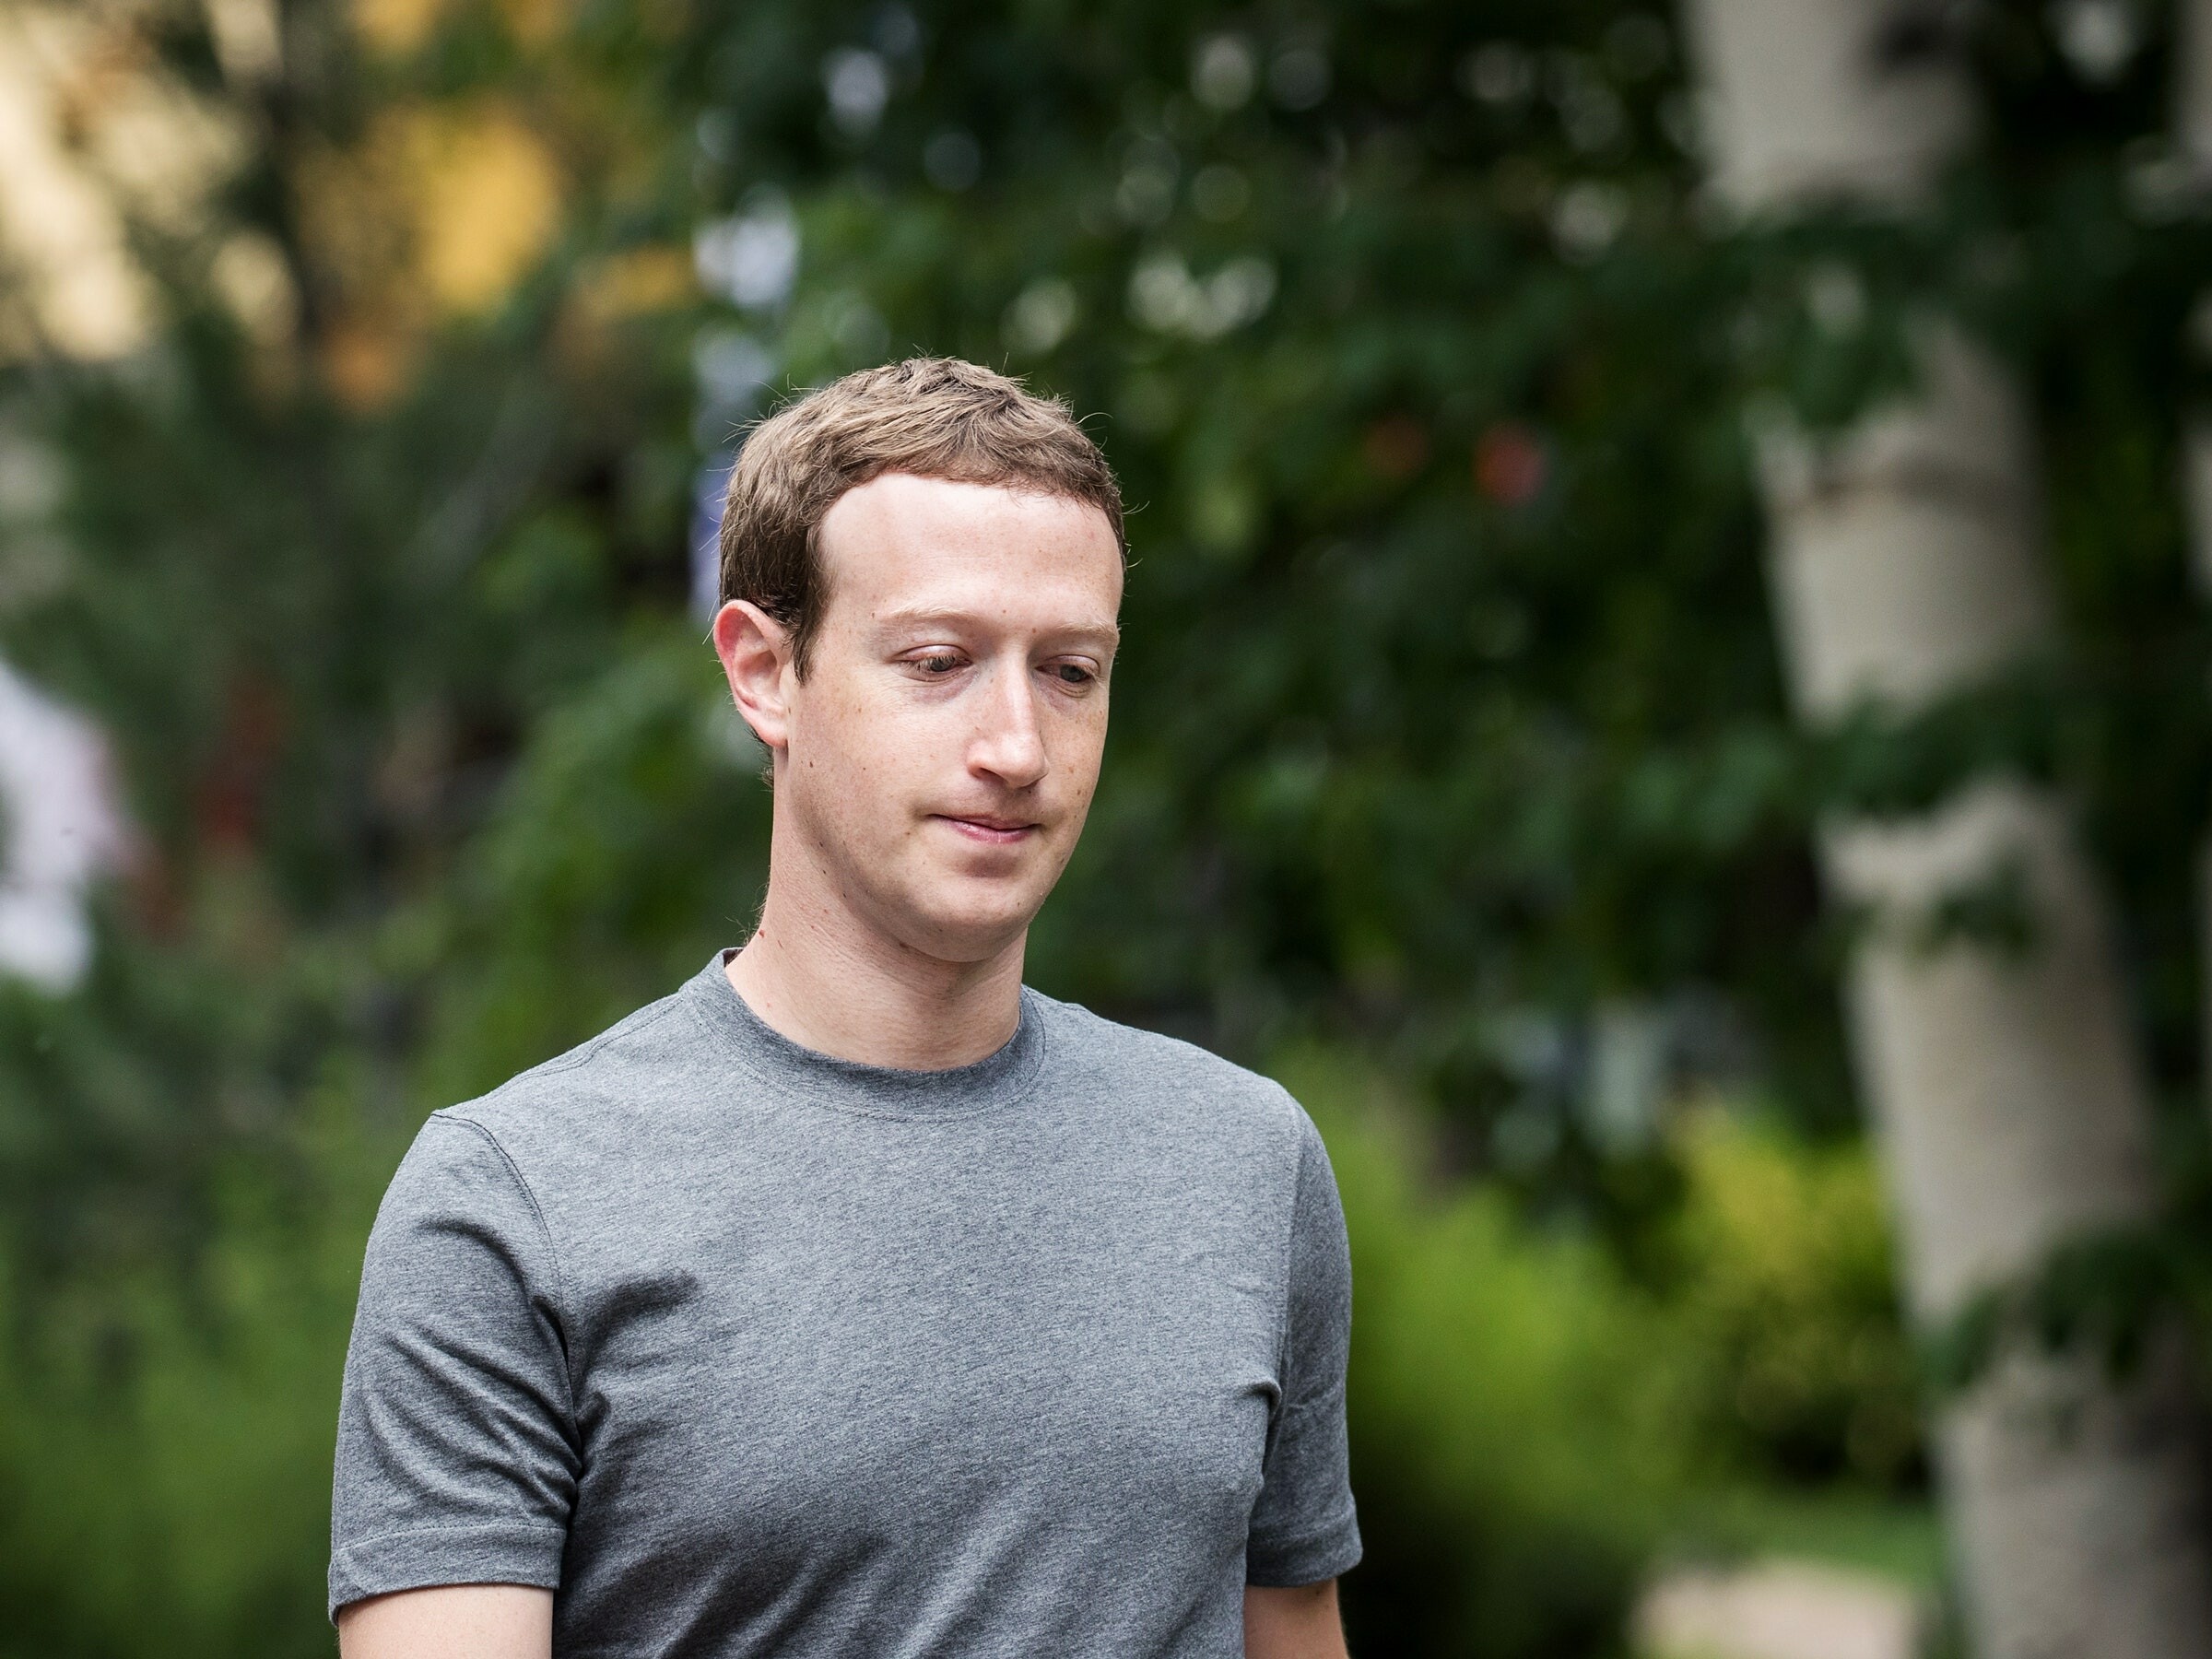 Mark Zuckerberg: The founder, chairman and CEO of Meta, Founded as Facebook in 2004. 2400x1800 HD Background.